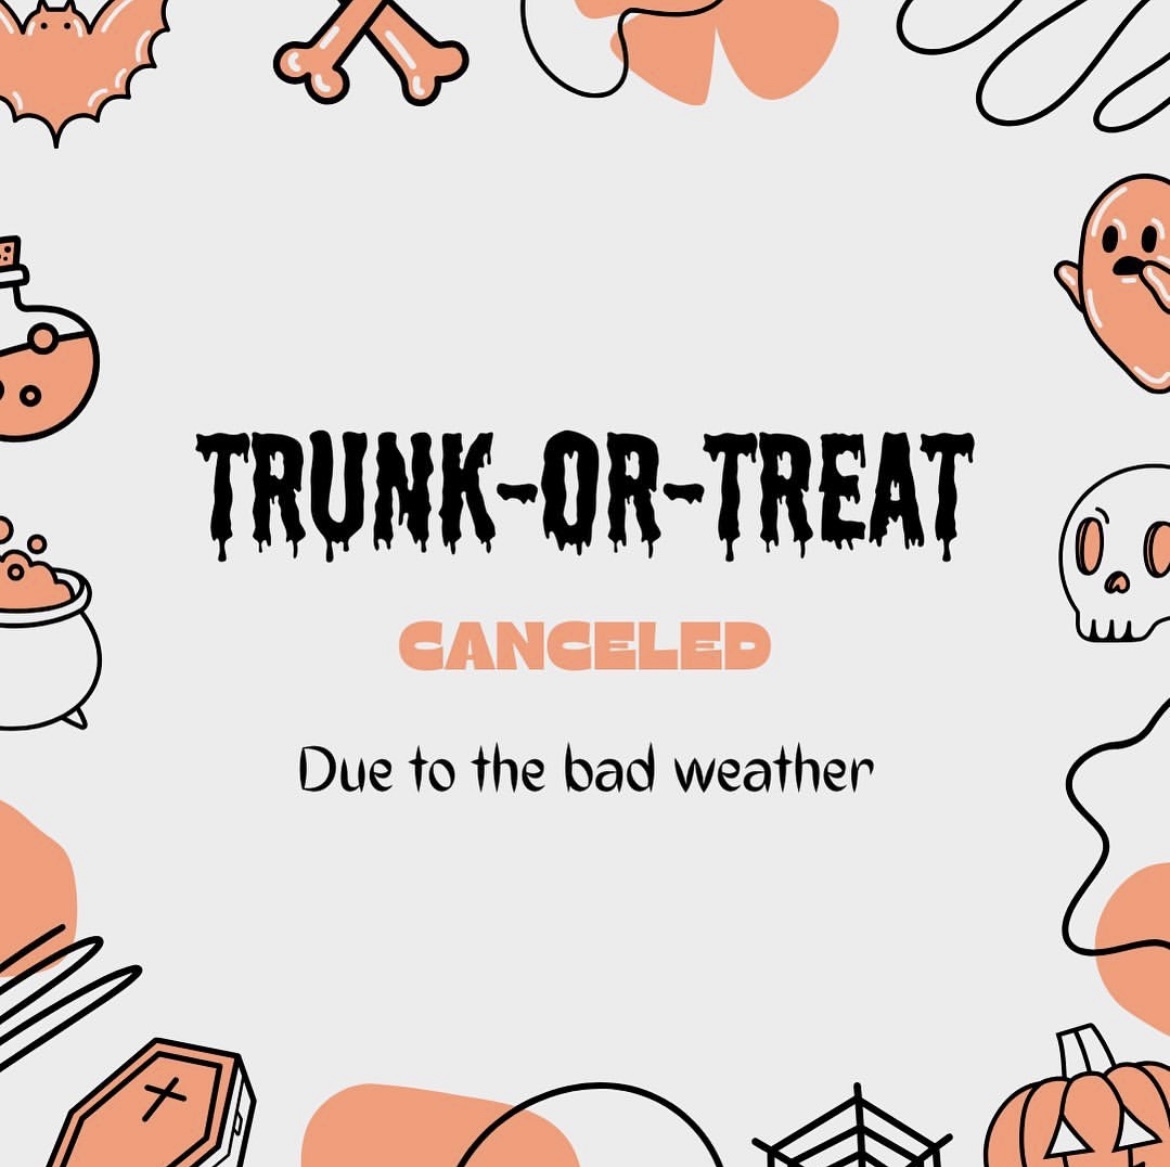 HOSA+posted+this+image+announcing+Trunk-or-Treat+being+canceled+Oct.+26.